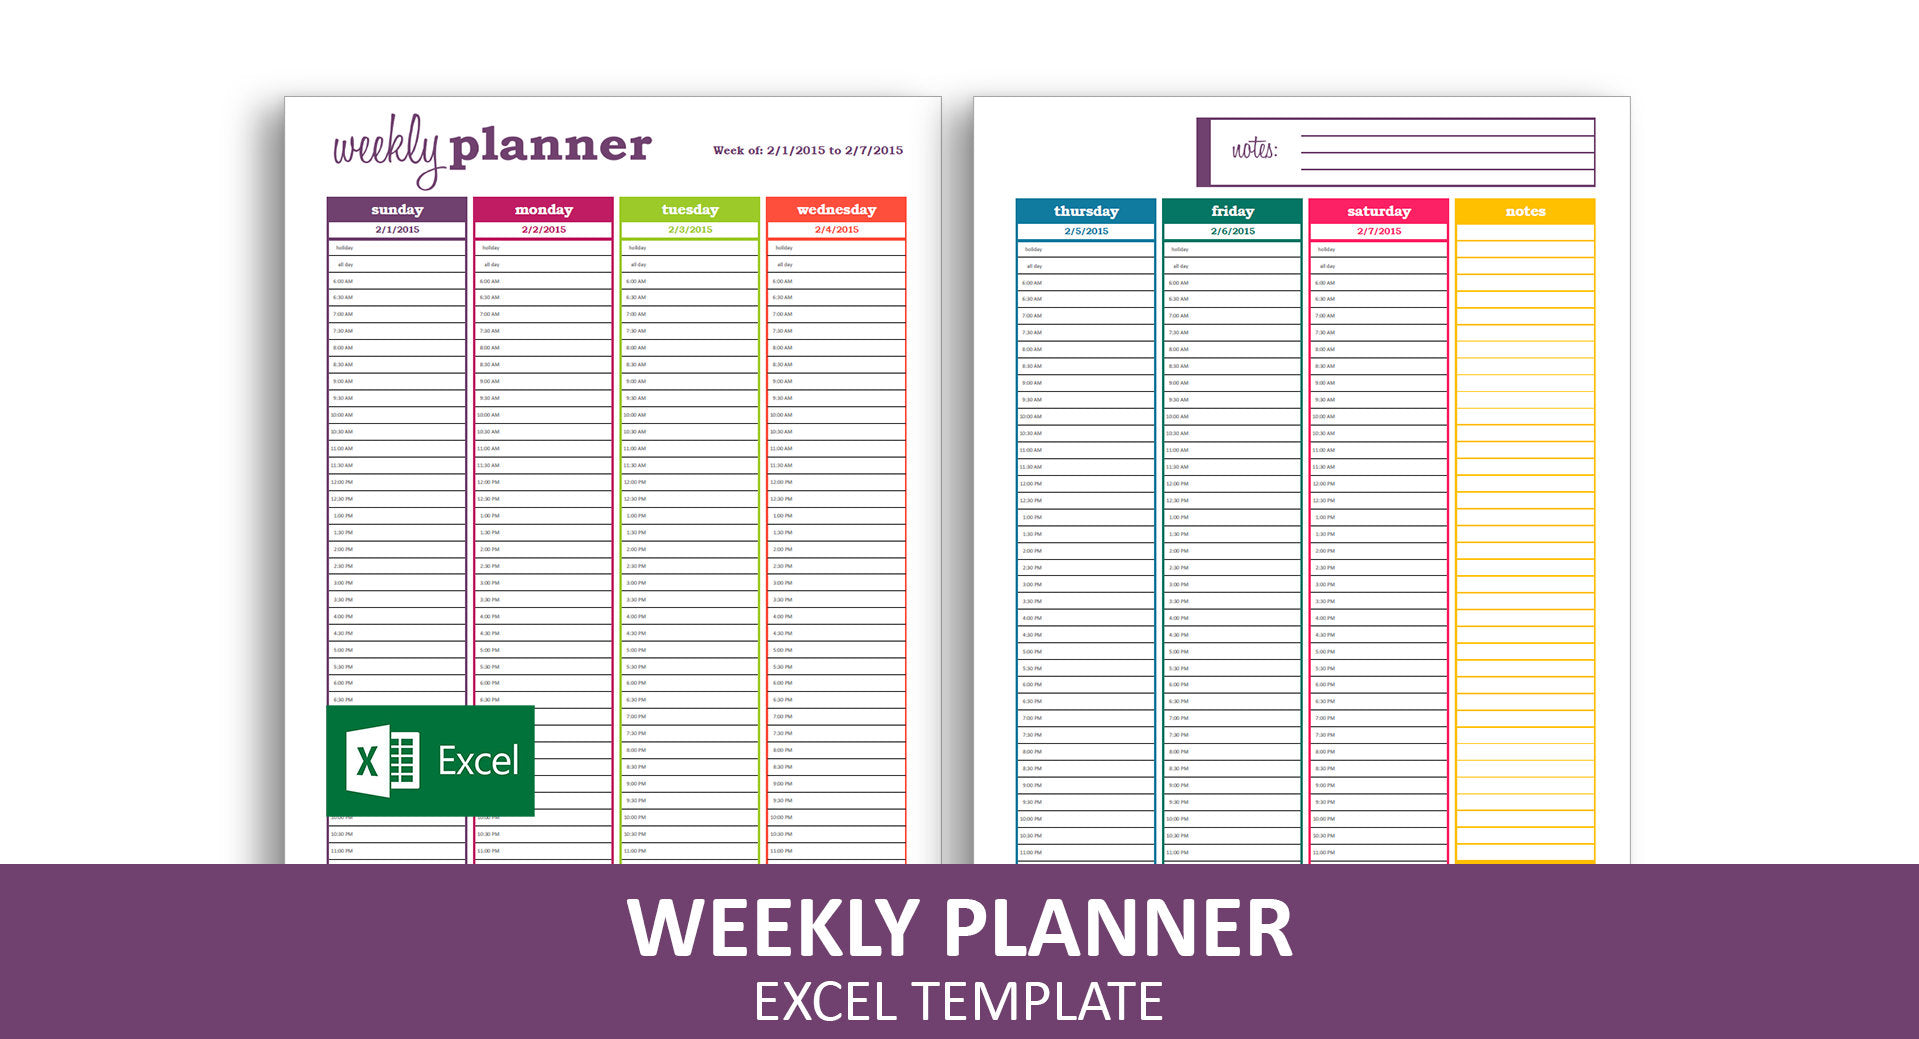 basic-weekly-planner-excel-template-savvy-spreadsheets